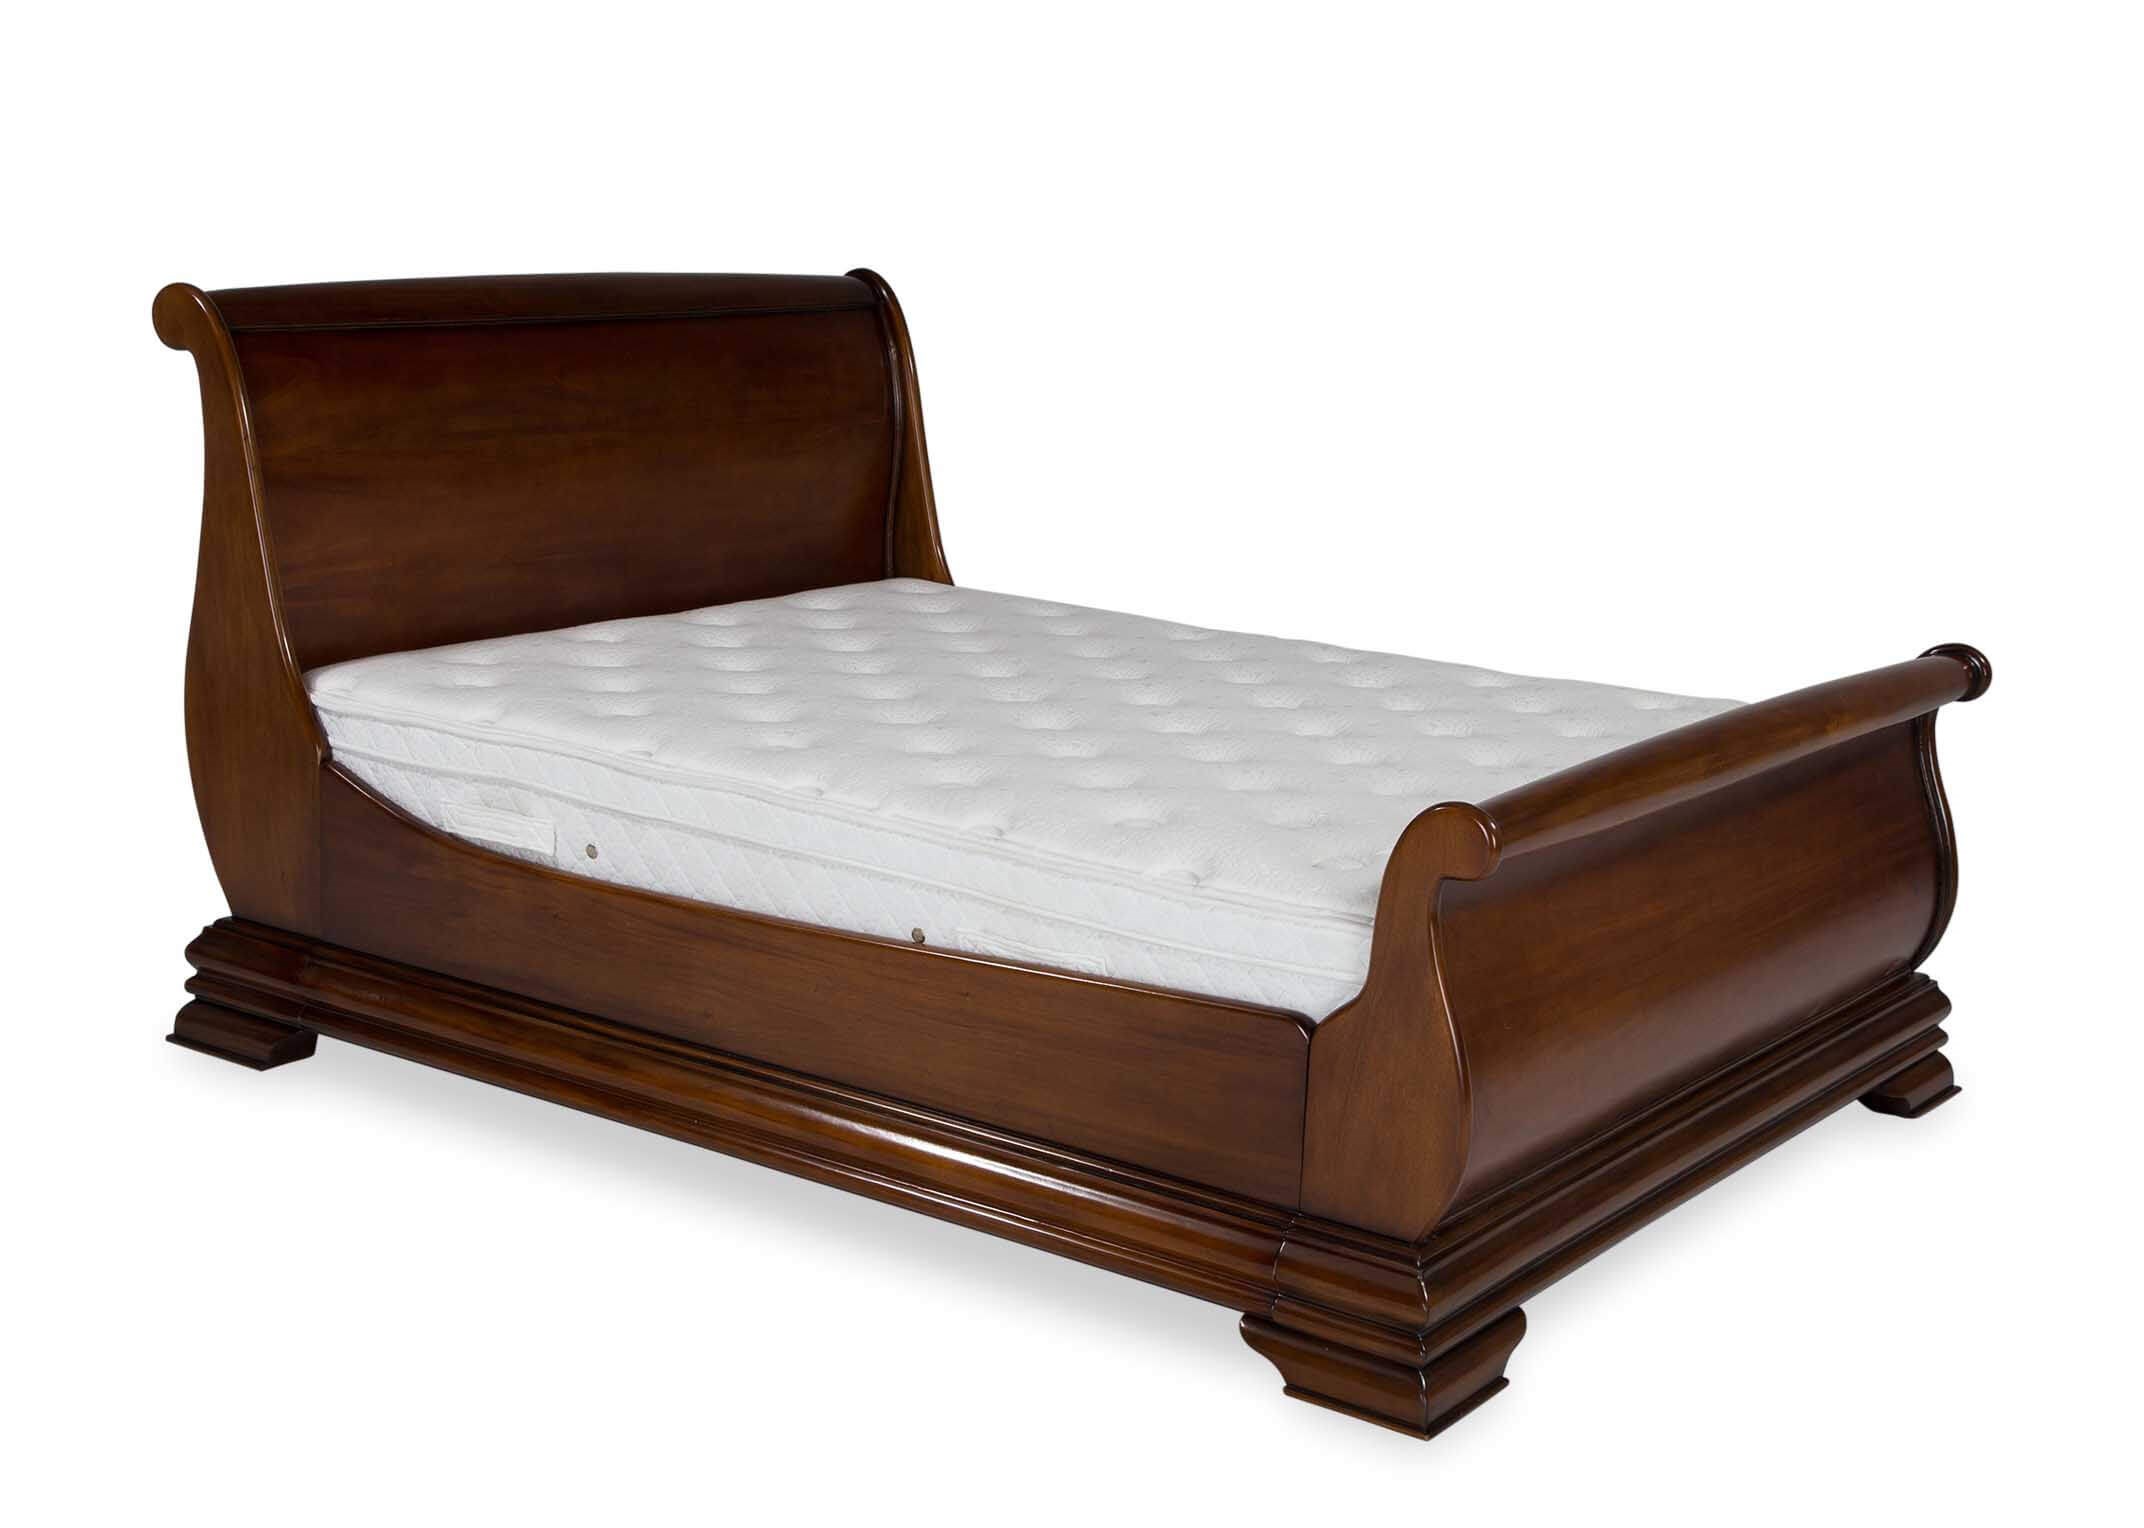 King Size 5 Ft Mahogany Bed Frame, King Size Wooden Sleigh Bed Frame